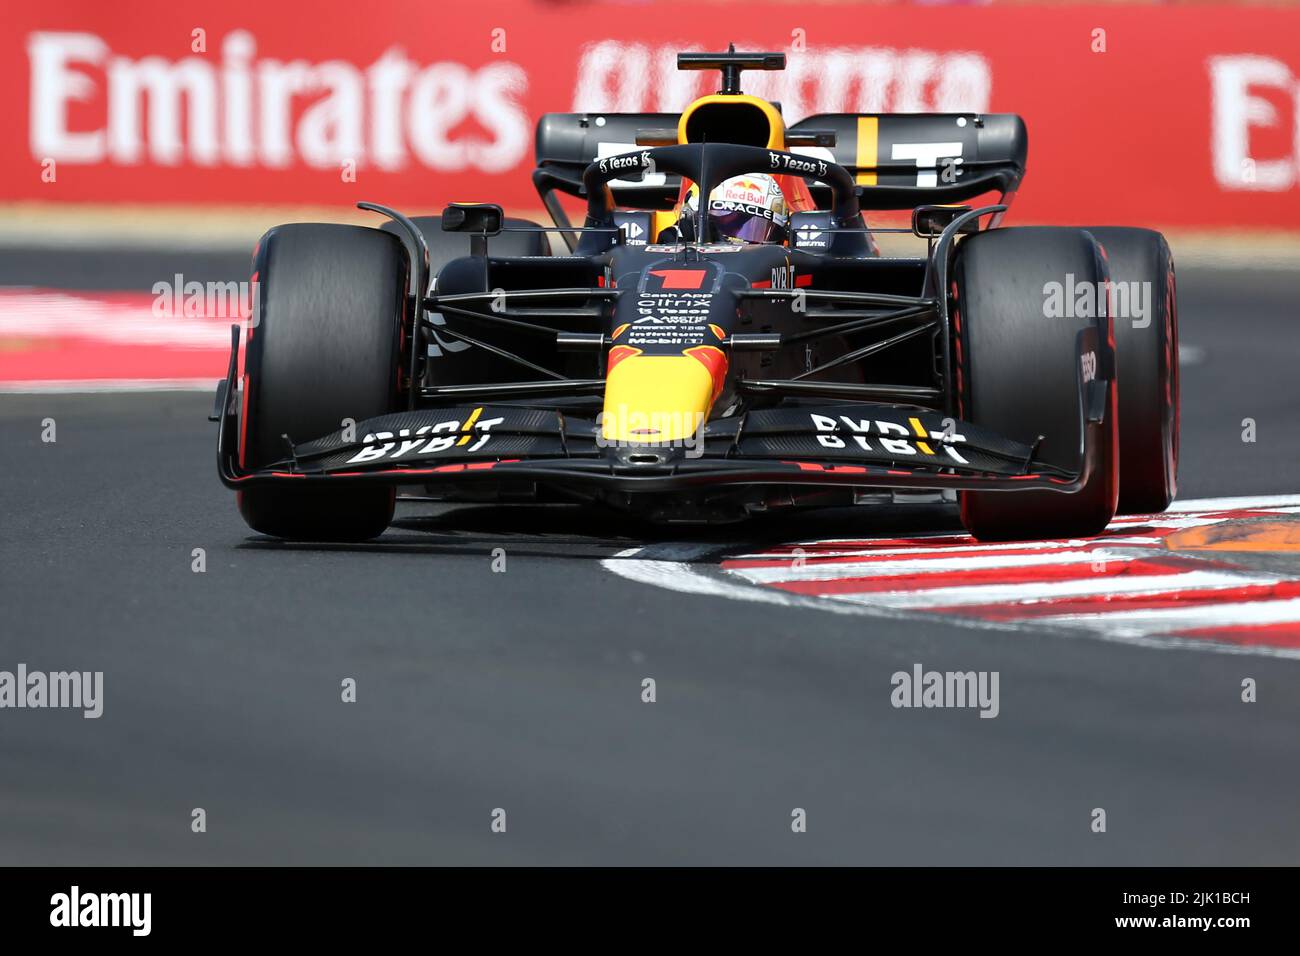 Max Verstappen of Red Bull Racing on track during free practice 1 ahead of the F1 Grand Prix of Hungary Stock Photo